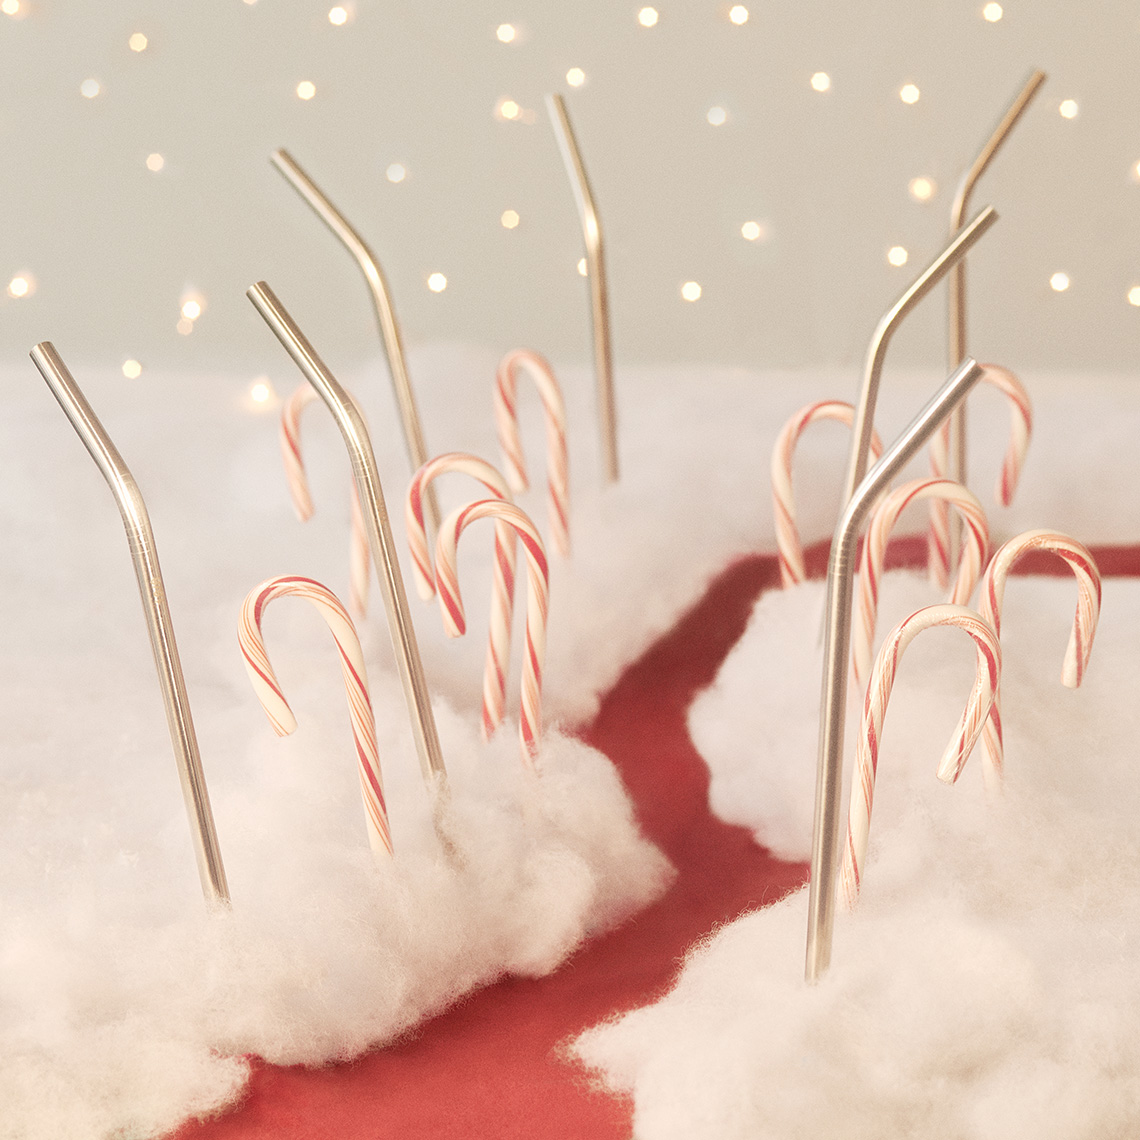 2019_HolidayCards_240_Straws_square